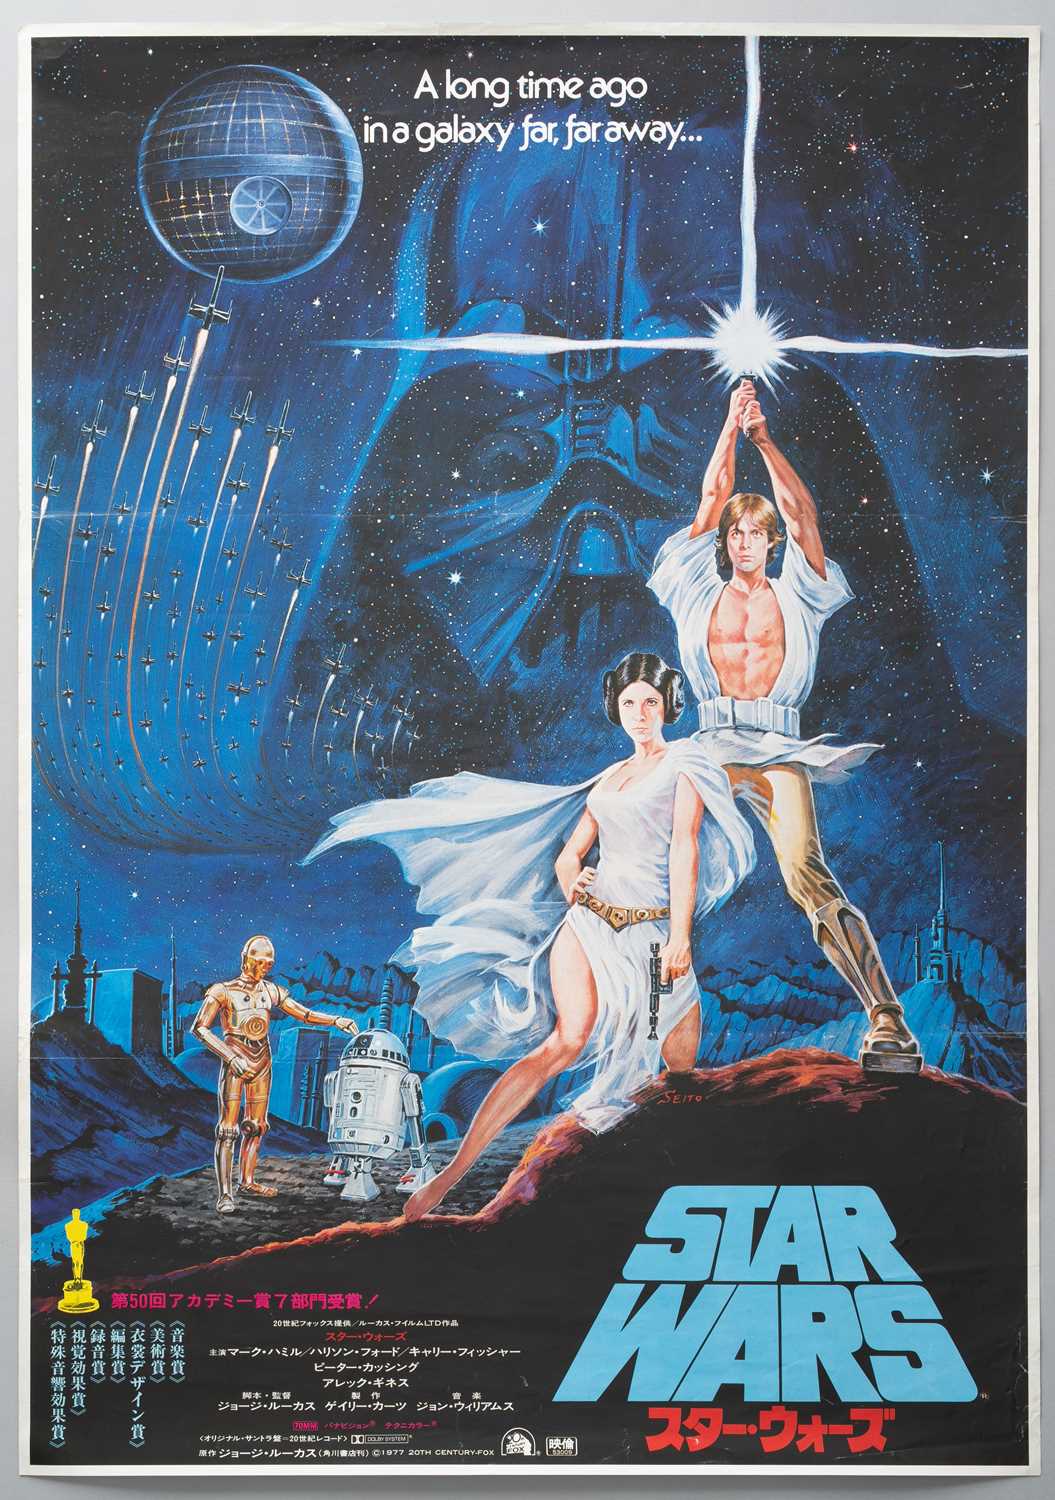 A JAPANESE STAR WARS POSTER SHOWA ERA, 1977 Featuring paintings of the main characters in Star Wars: